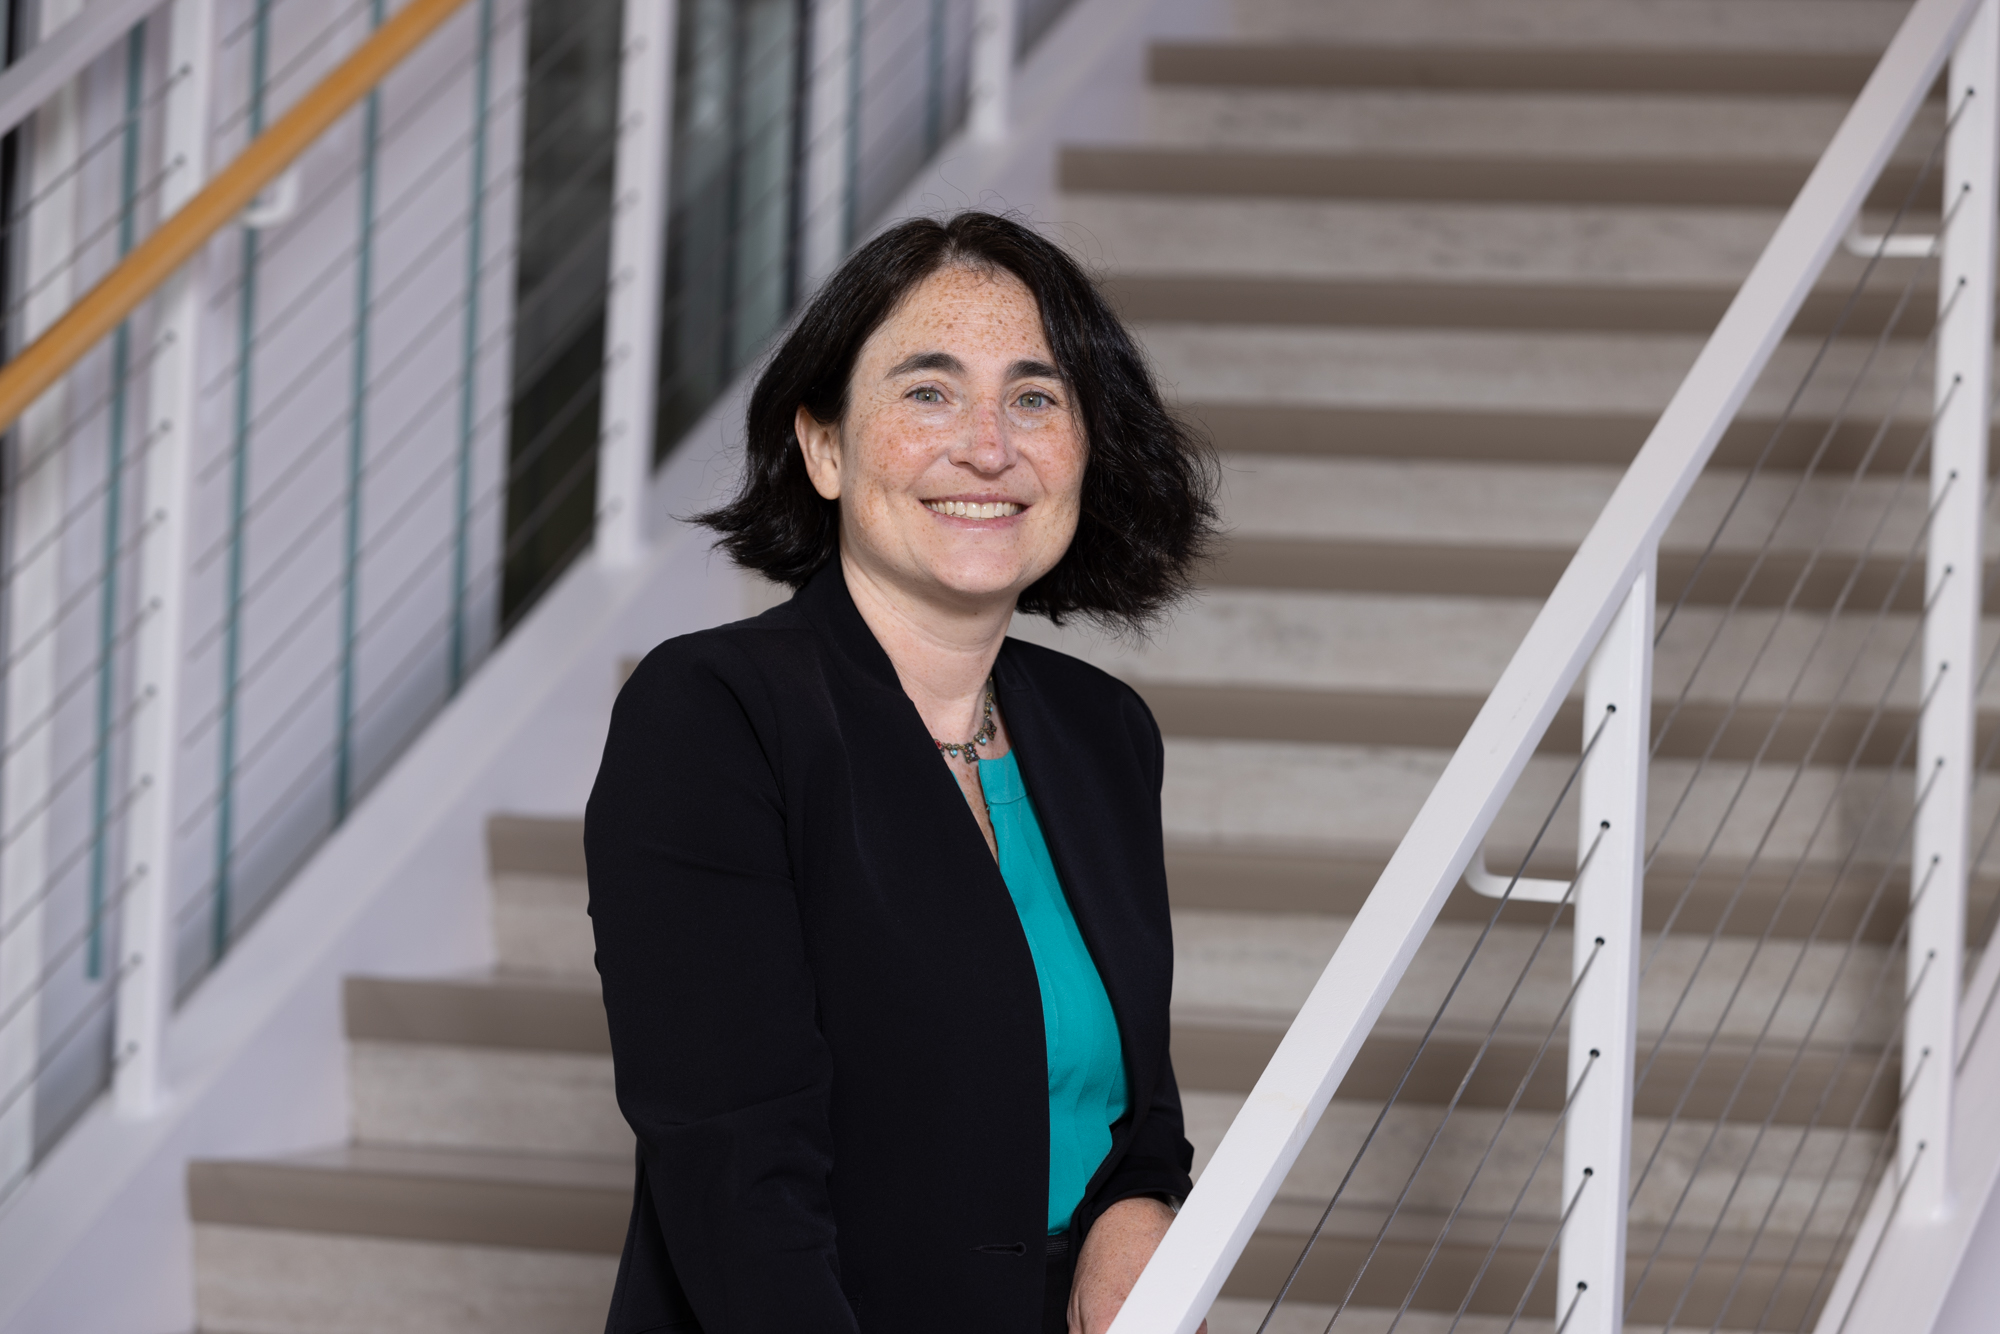 Q&A With Dr. Katherine Ornstein, New Director for the Center for Equity in Aging